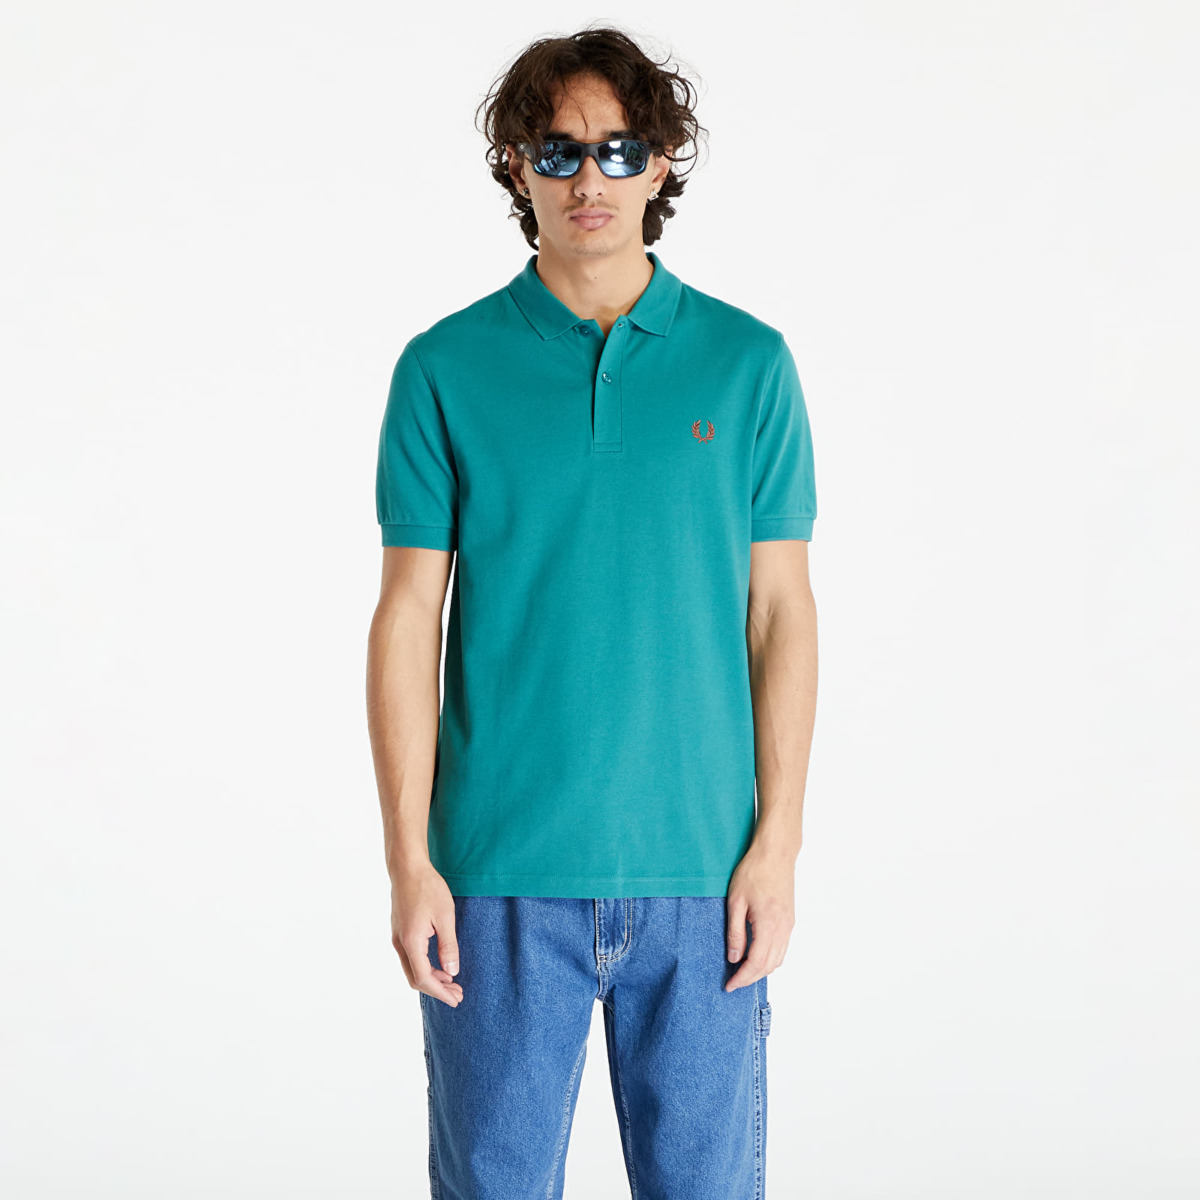 Footshop - Gents Top Green - Fred Perry GOOFASH